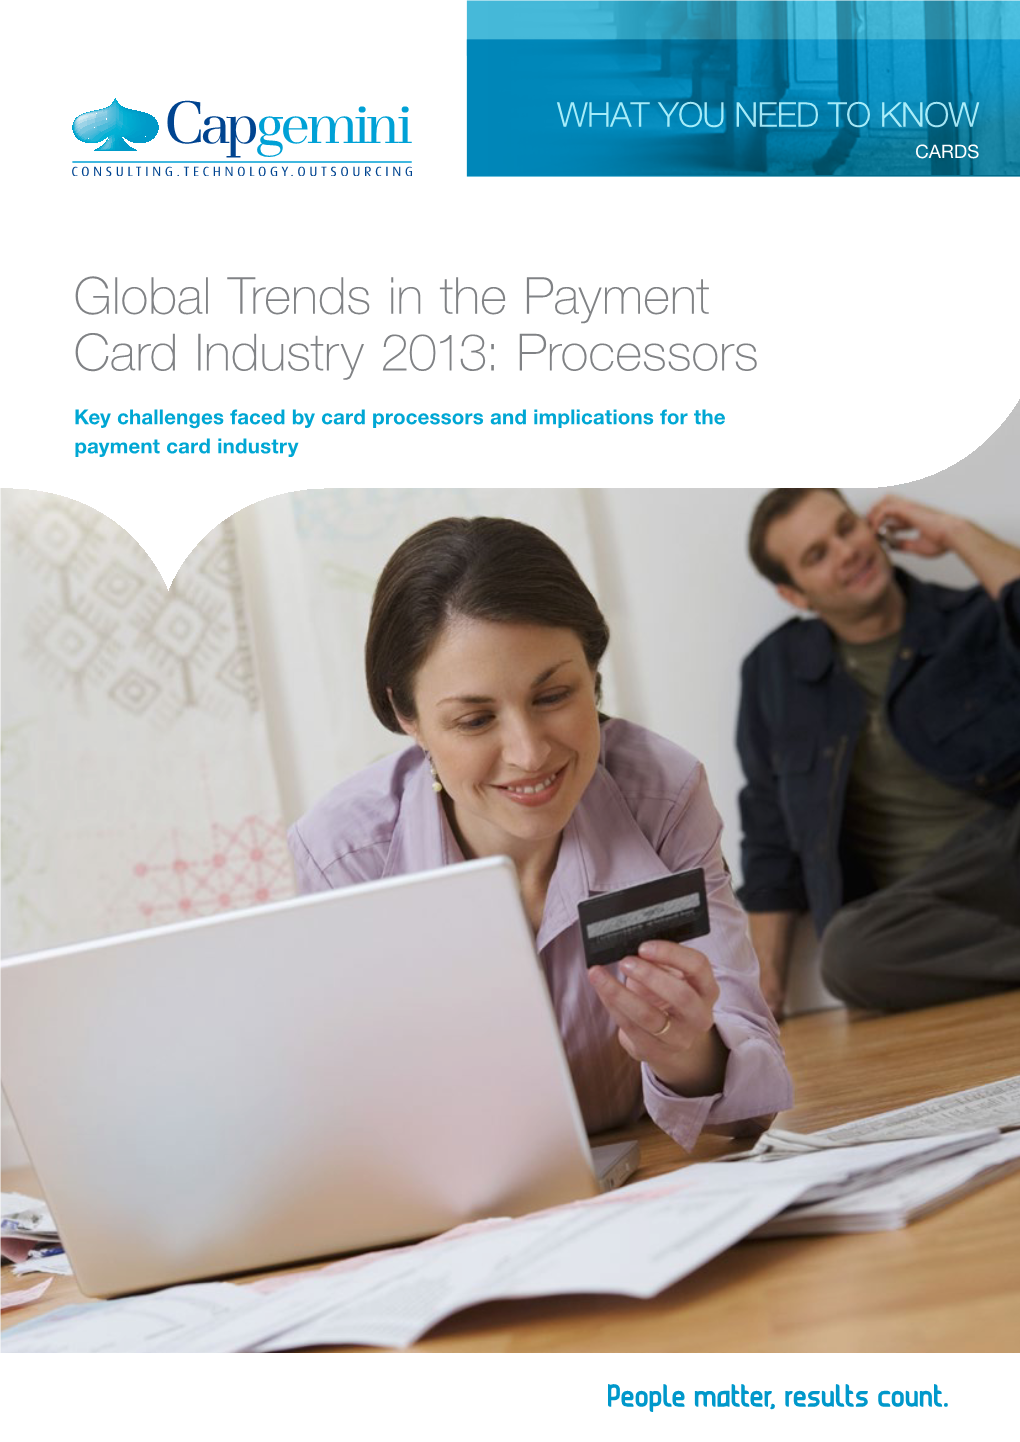 Global Trends in the Payment Card Industry 2013: Processors